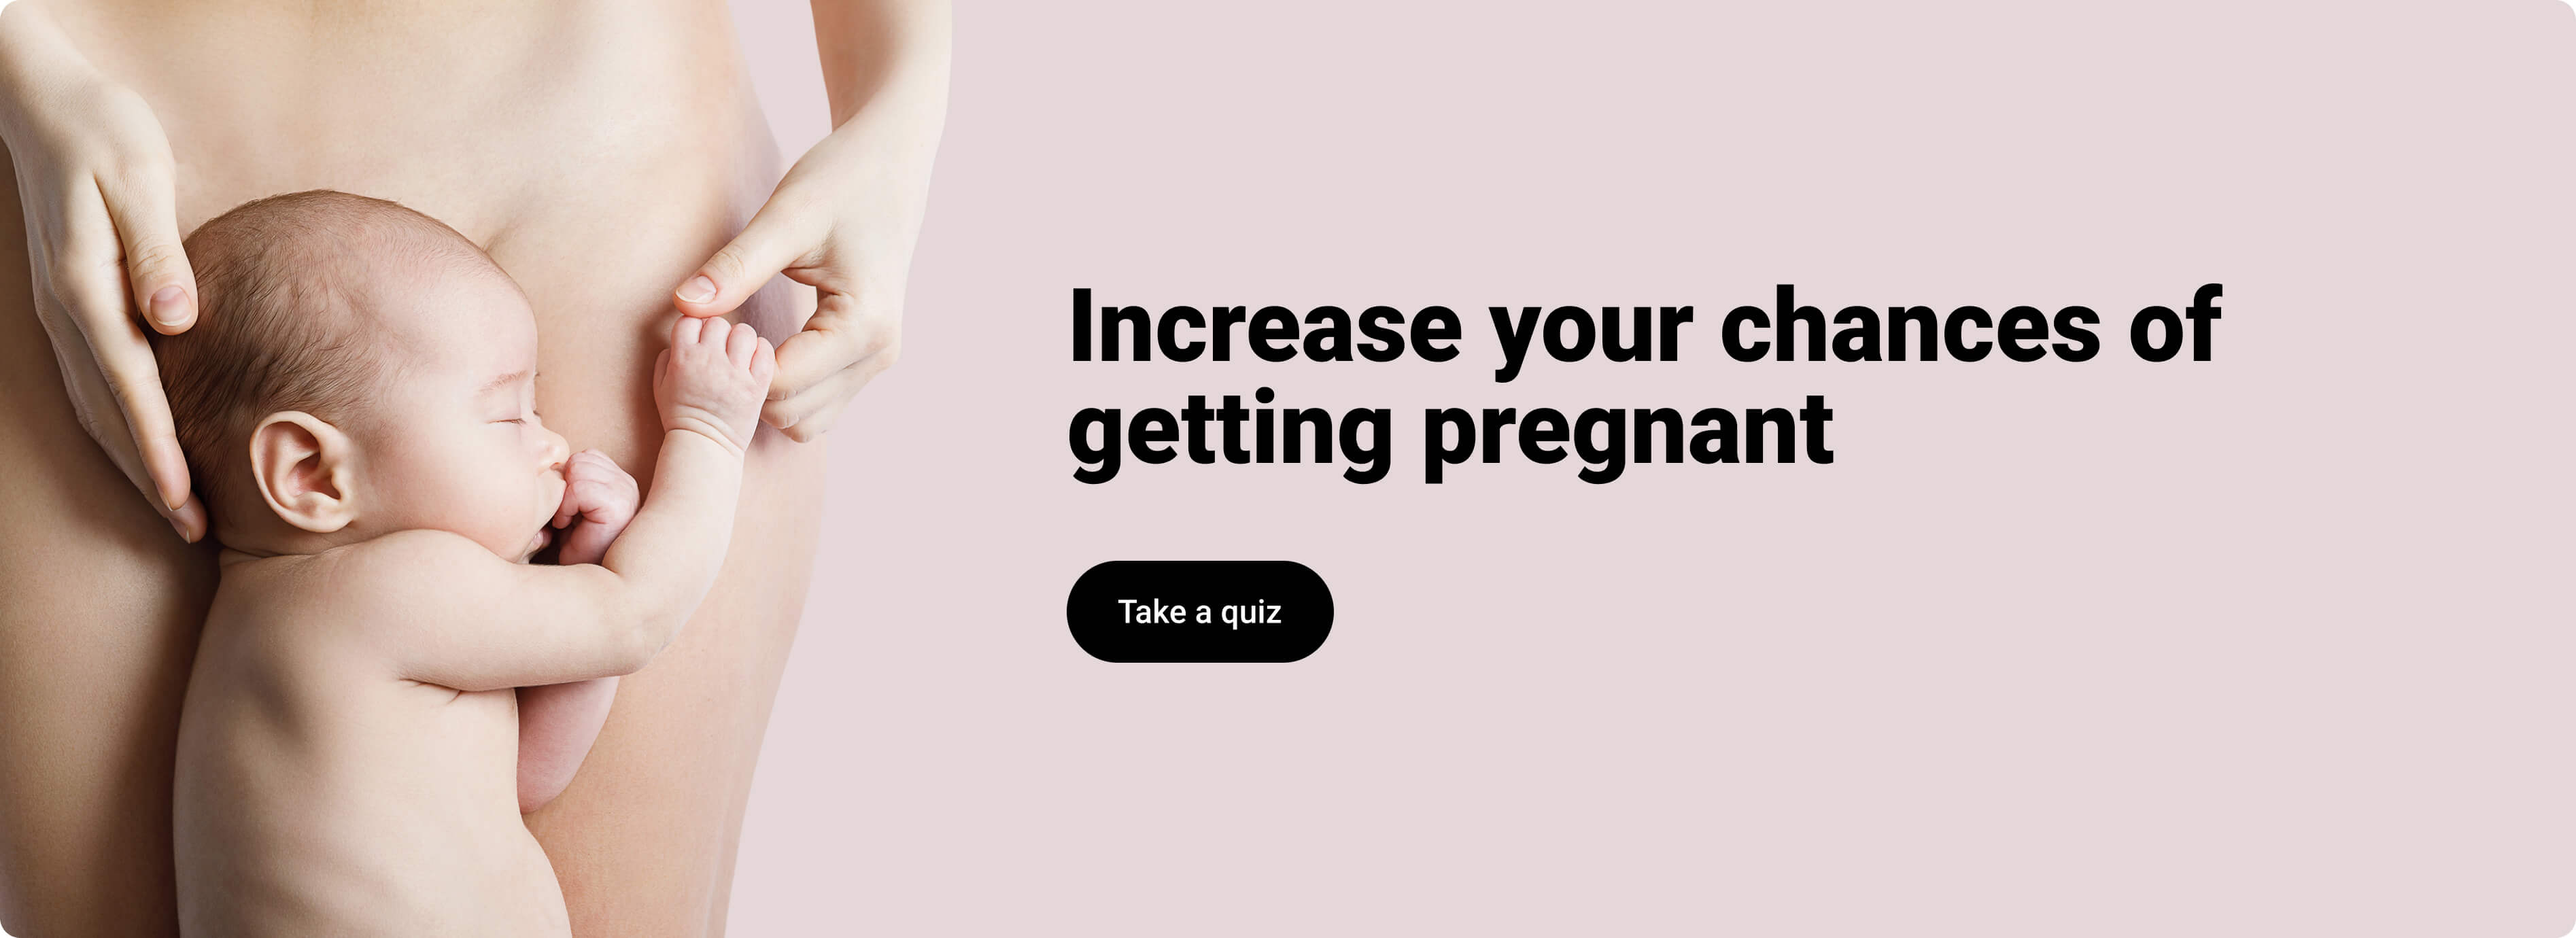 Sperm can make you Phat (Pregnant) 11